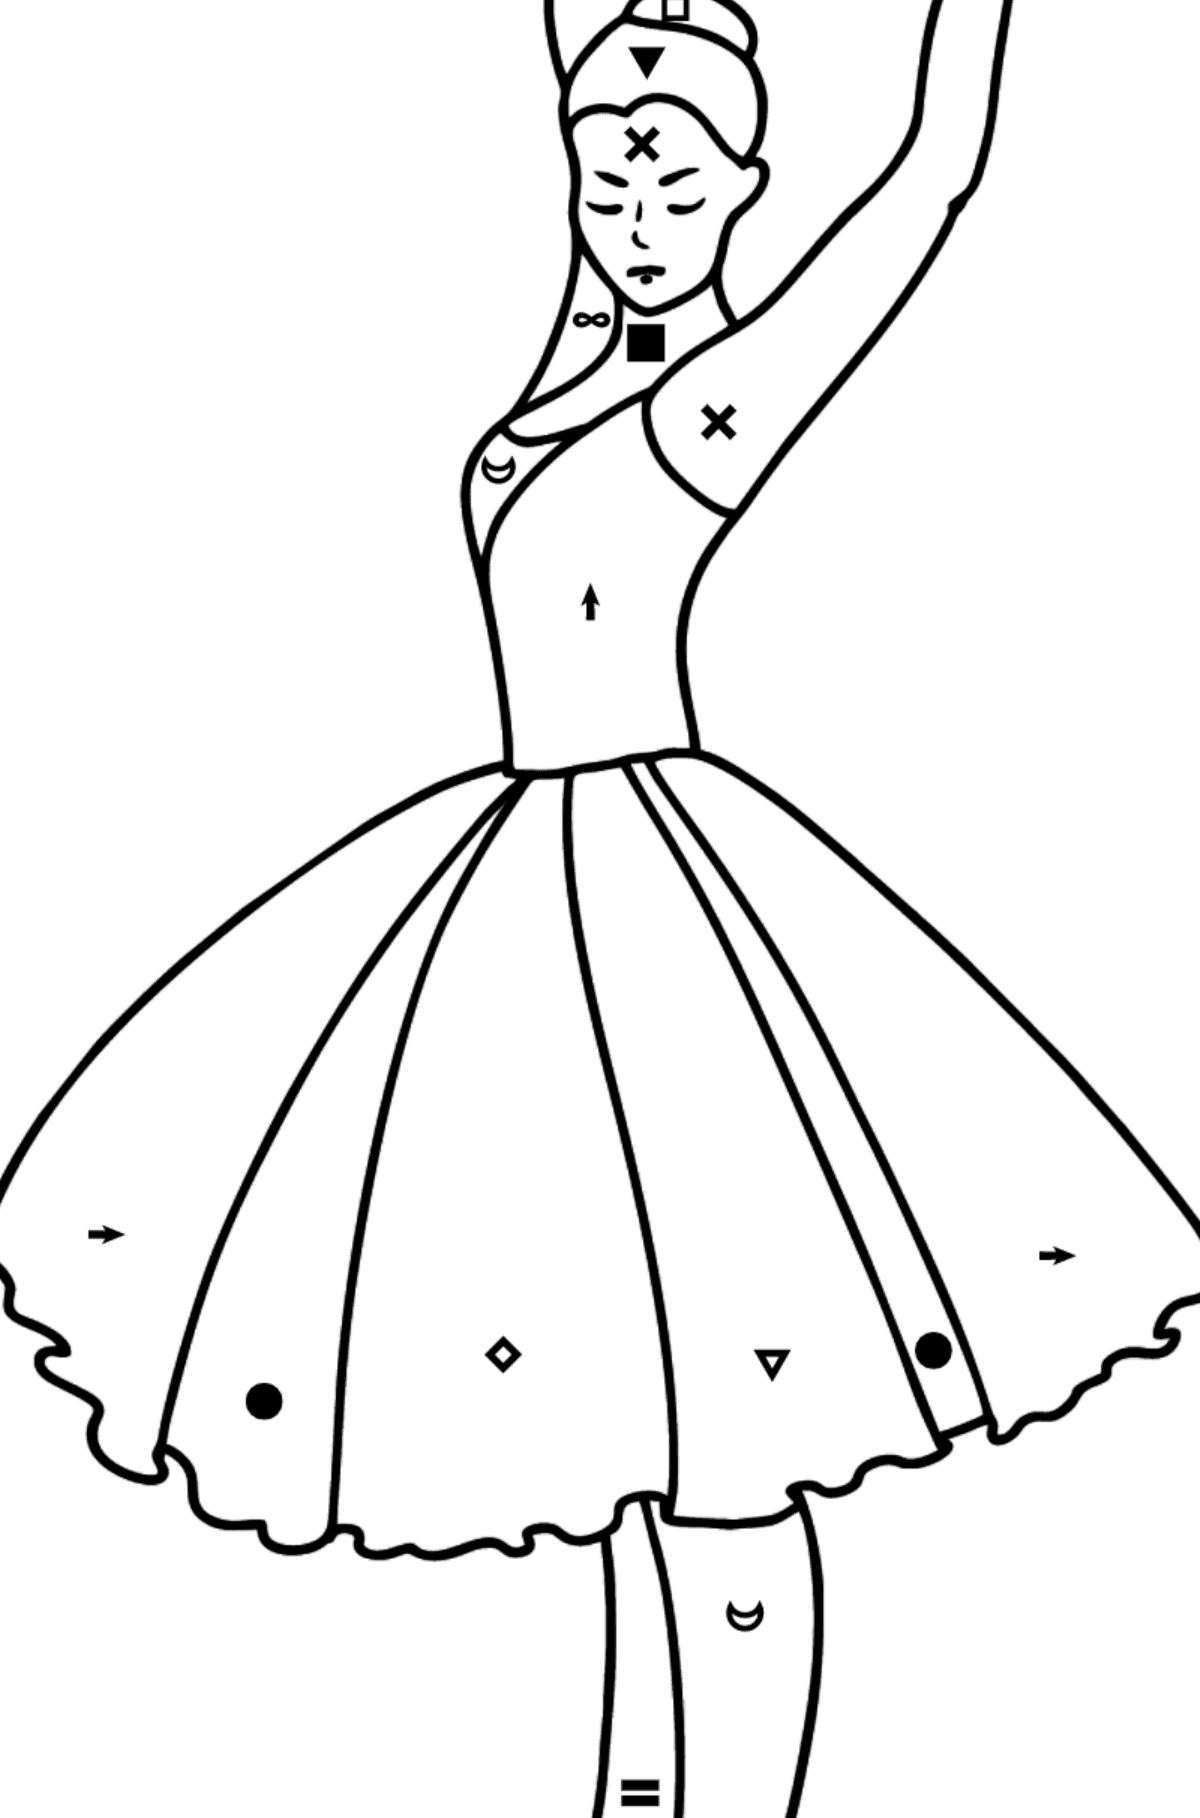 Ballerina Dancing coloring page - Coloring by Symbols for Kids